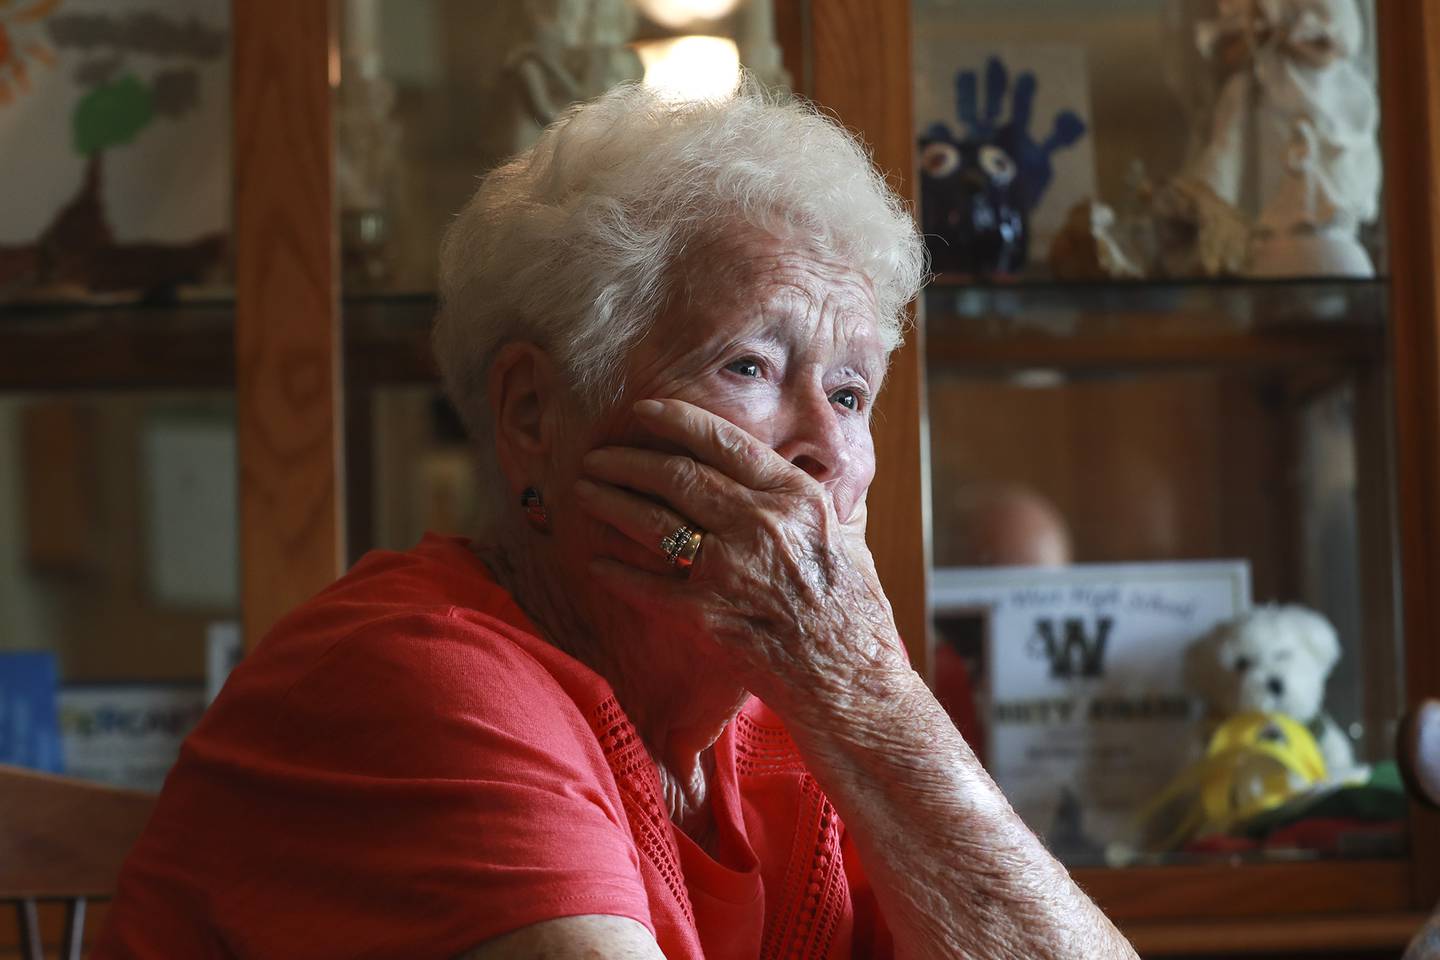 Georgia Donisch listens to learns about the process through which her father, Arthur Countryman's remains were identified on Tuesday, July 13, 2021, at her nephew Brian Papesh's home in Plainfield, Ill.